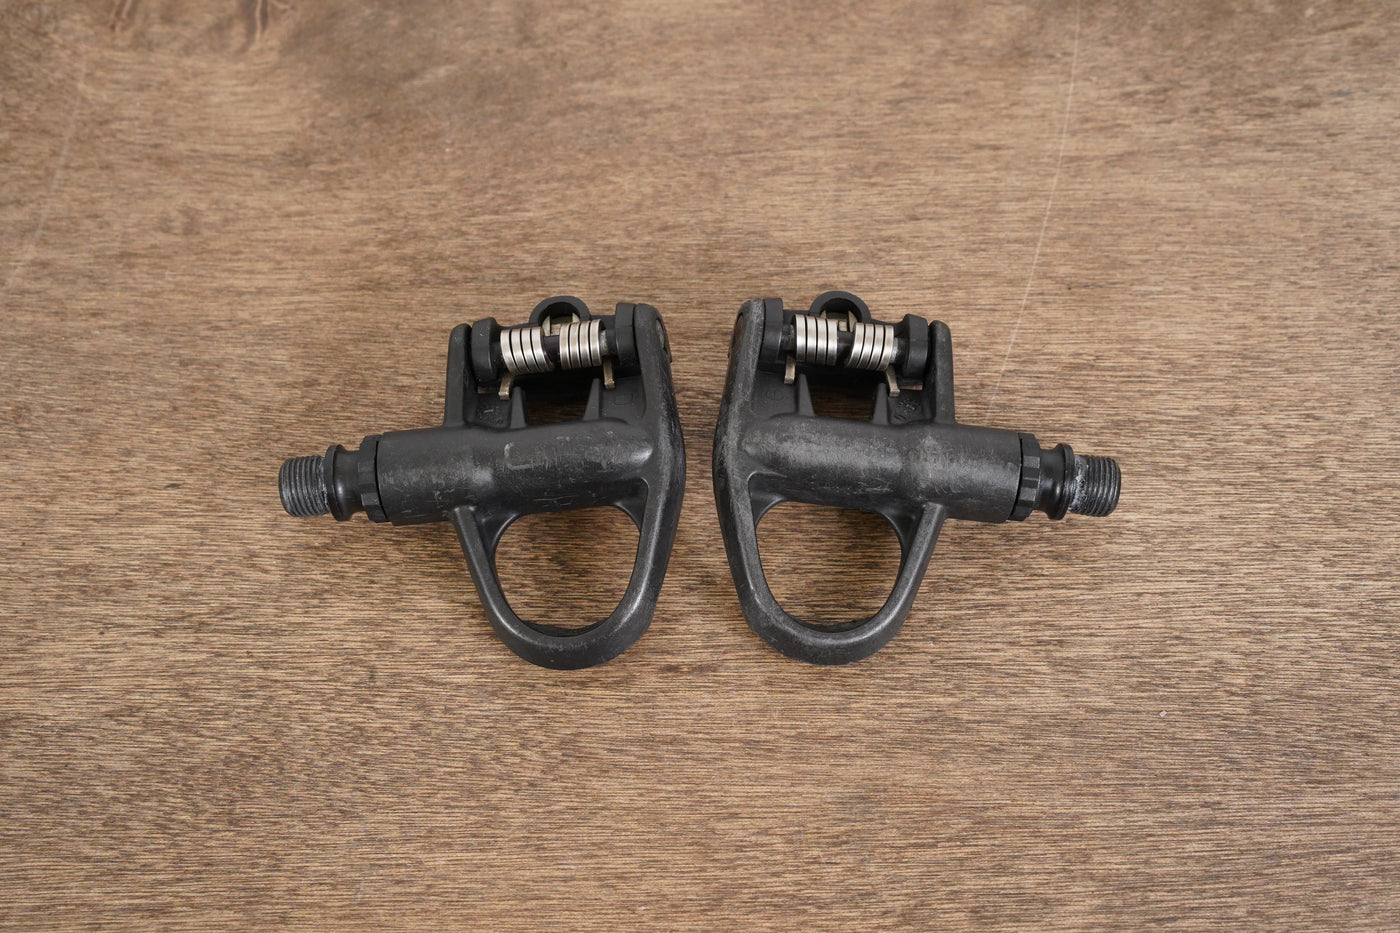 LOOK Keo Clasicc 3 Clipless Road Pedals 230g